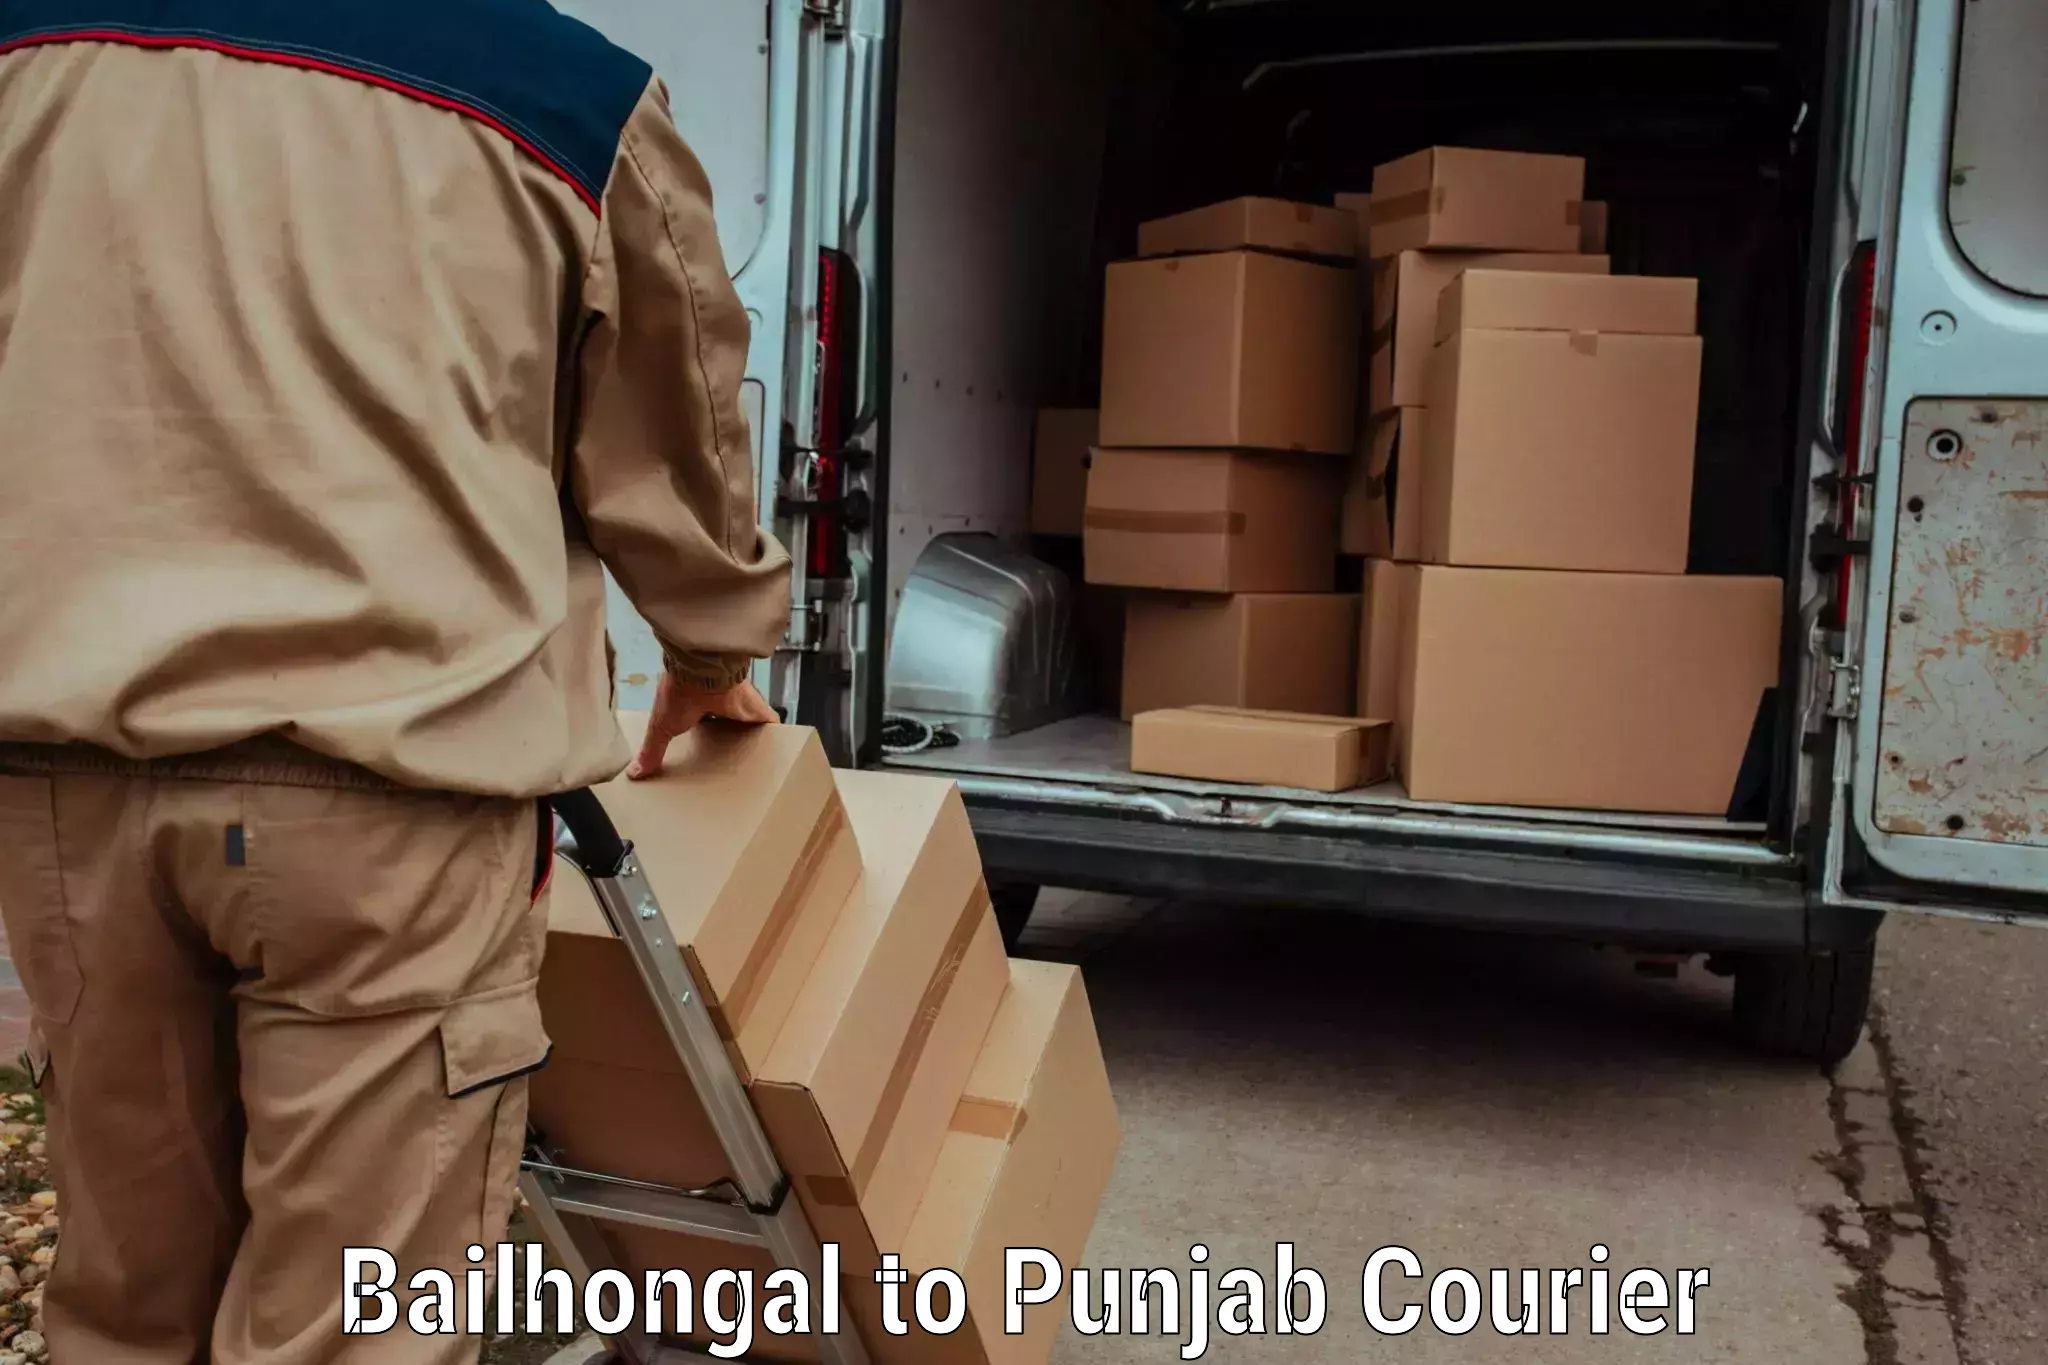 Easy access courier services in Bailhongal to Amritsar